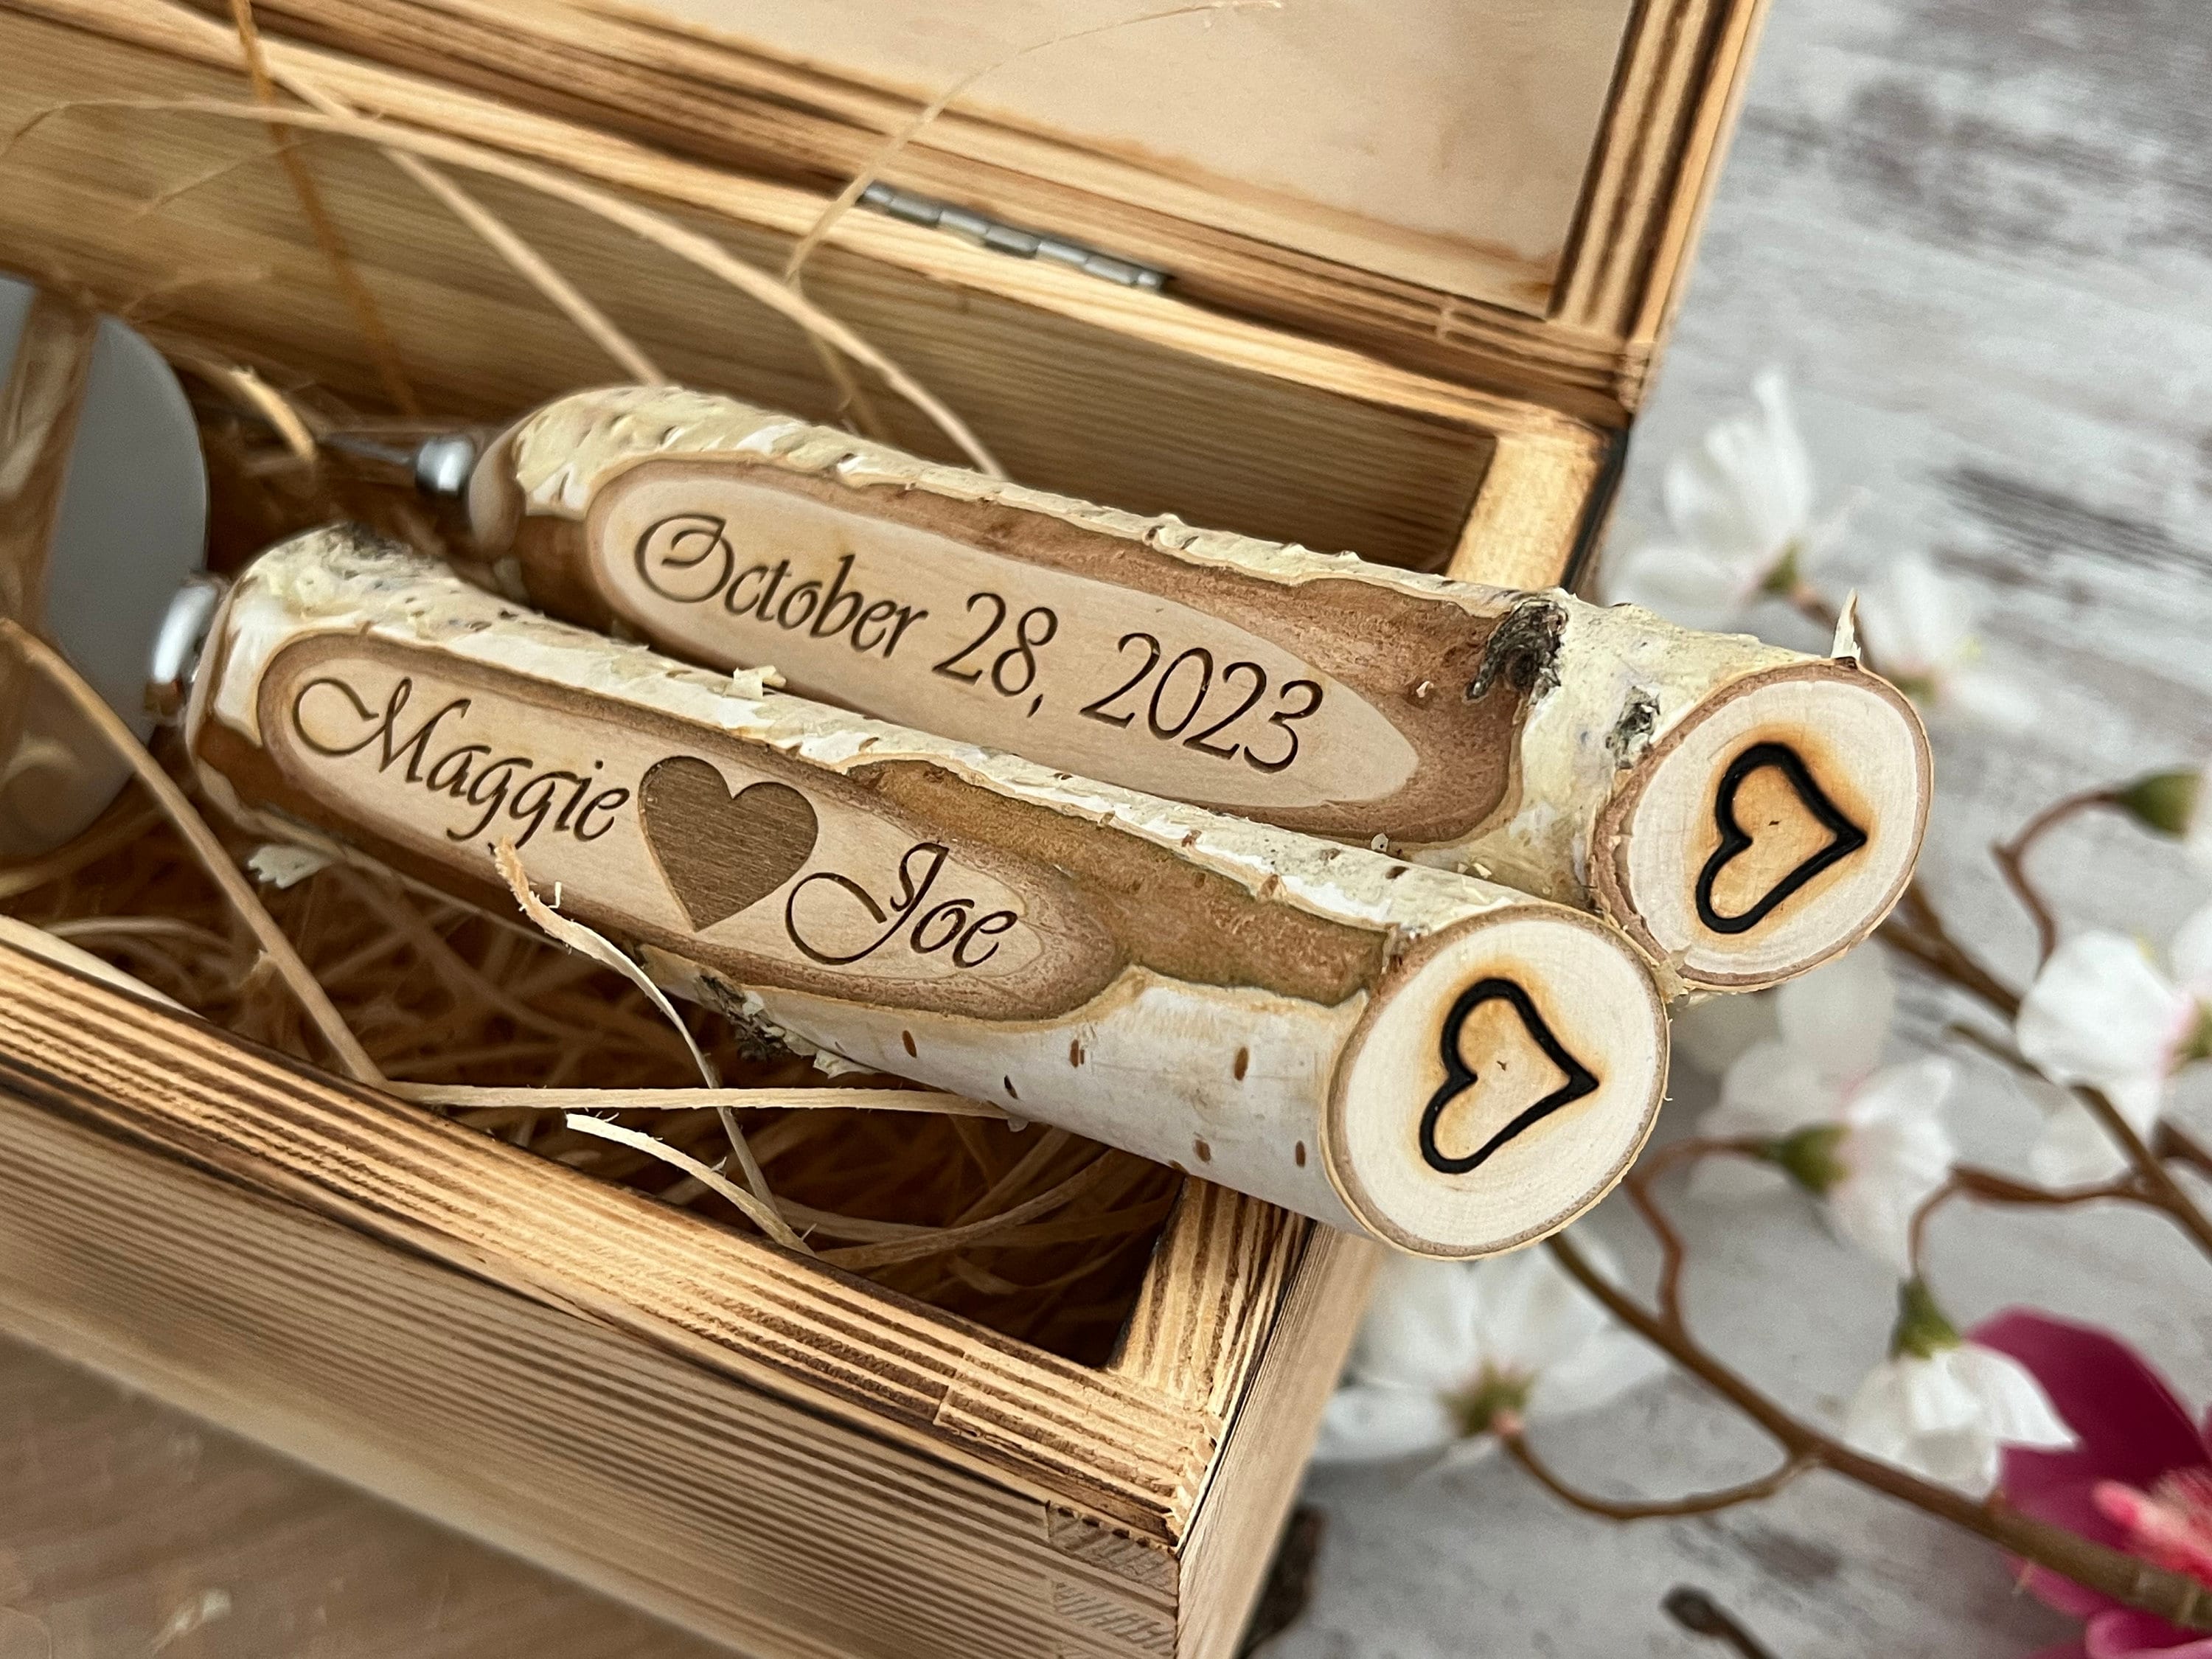 Rustic Country Chic Wedding Knife Set, Natural Birch Branch Rustic